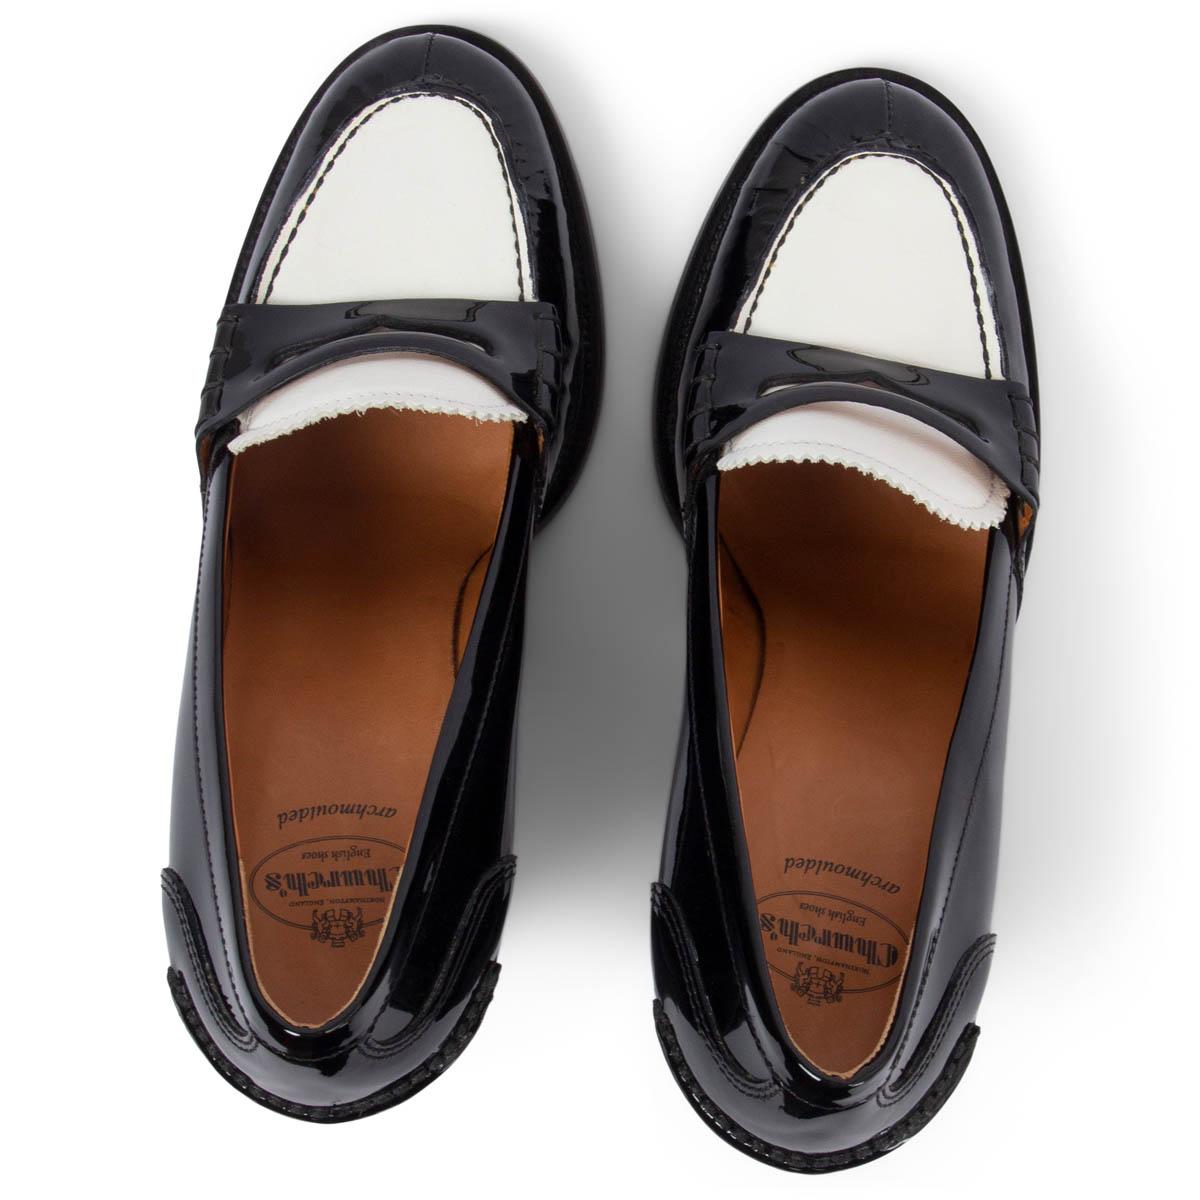 Black CHURCH'S black & white patent leather LOAFER Pumps Shoes 38 For Sale